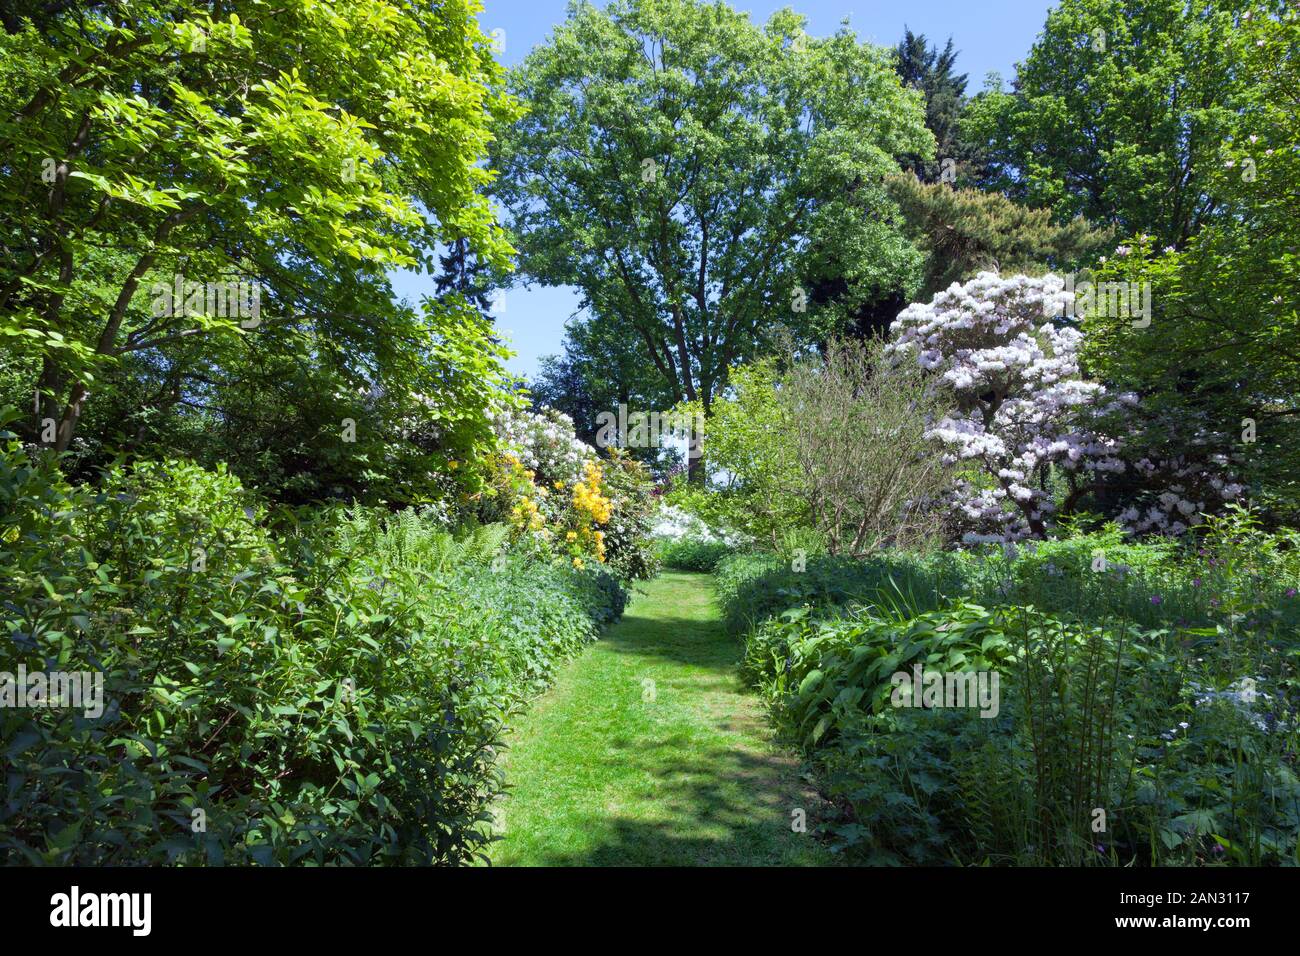 Grassy path between evergreen plants, mature trees, flowering rhododendrons in an informal garden with lush vegetation, in an English countryside . Stock Photo